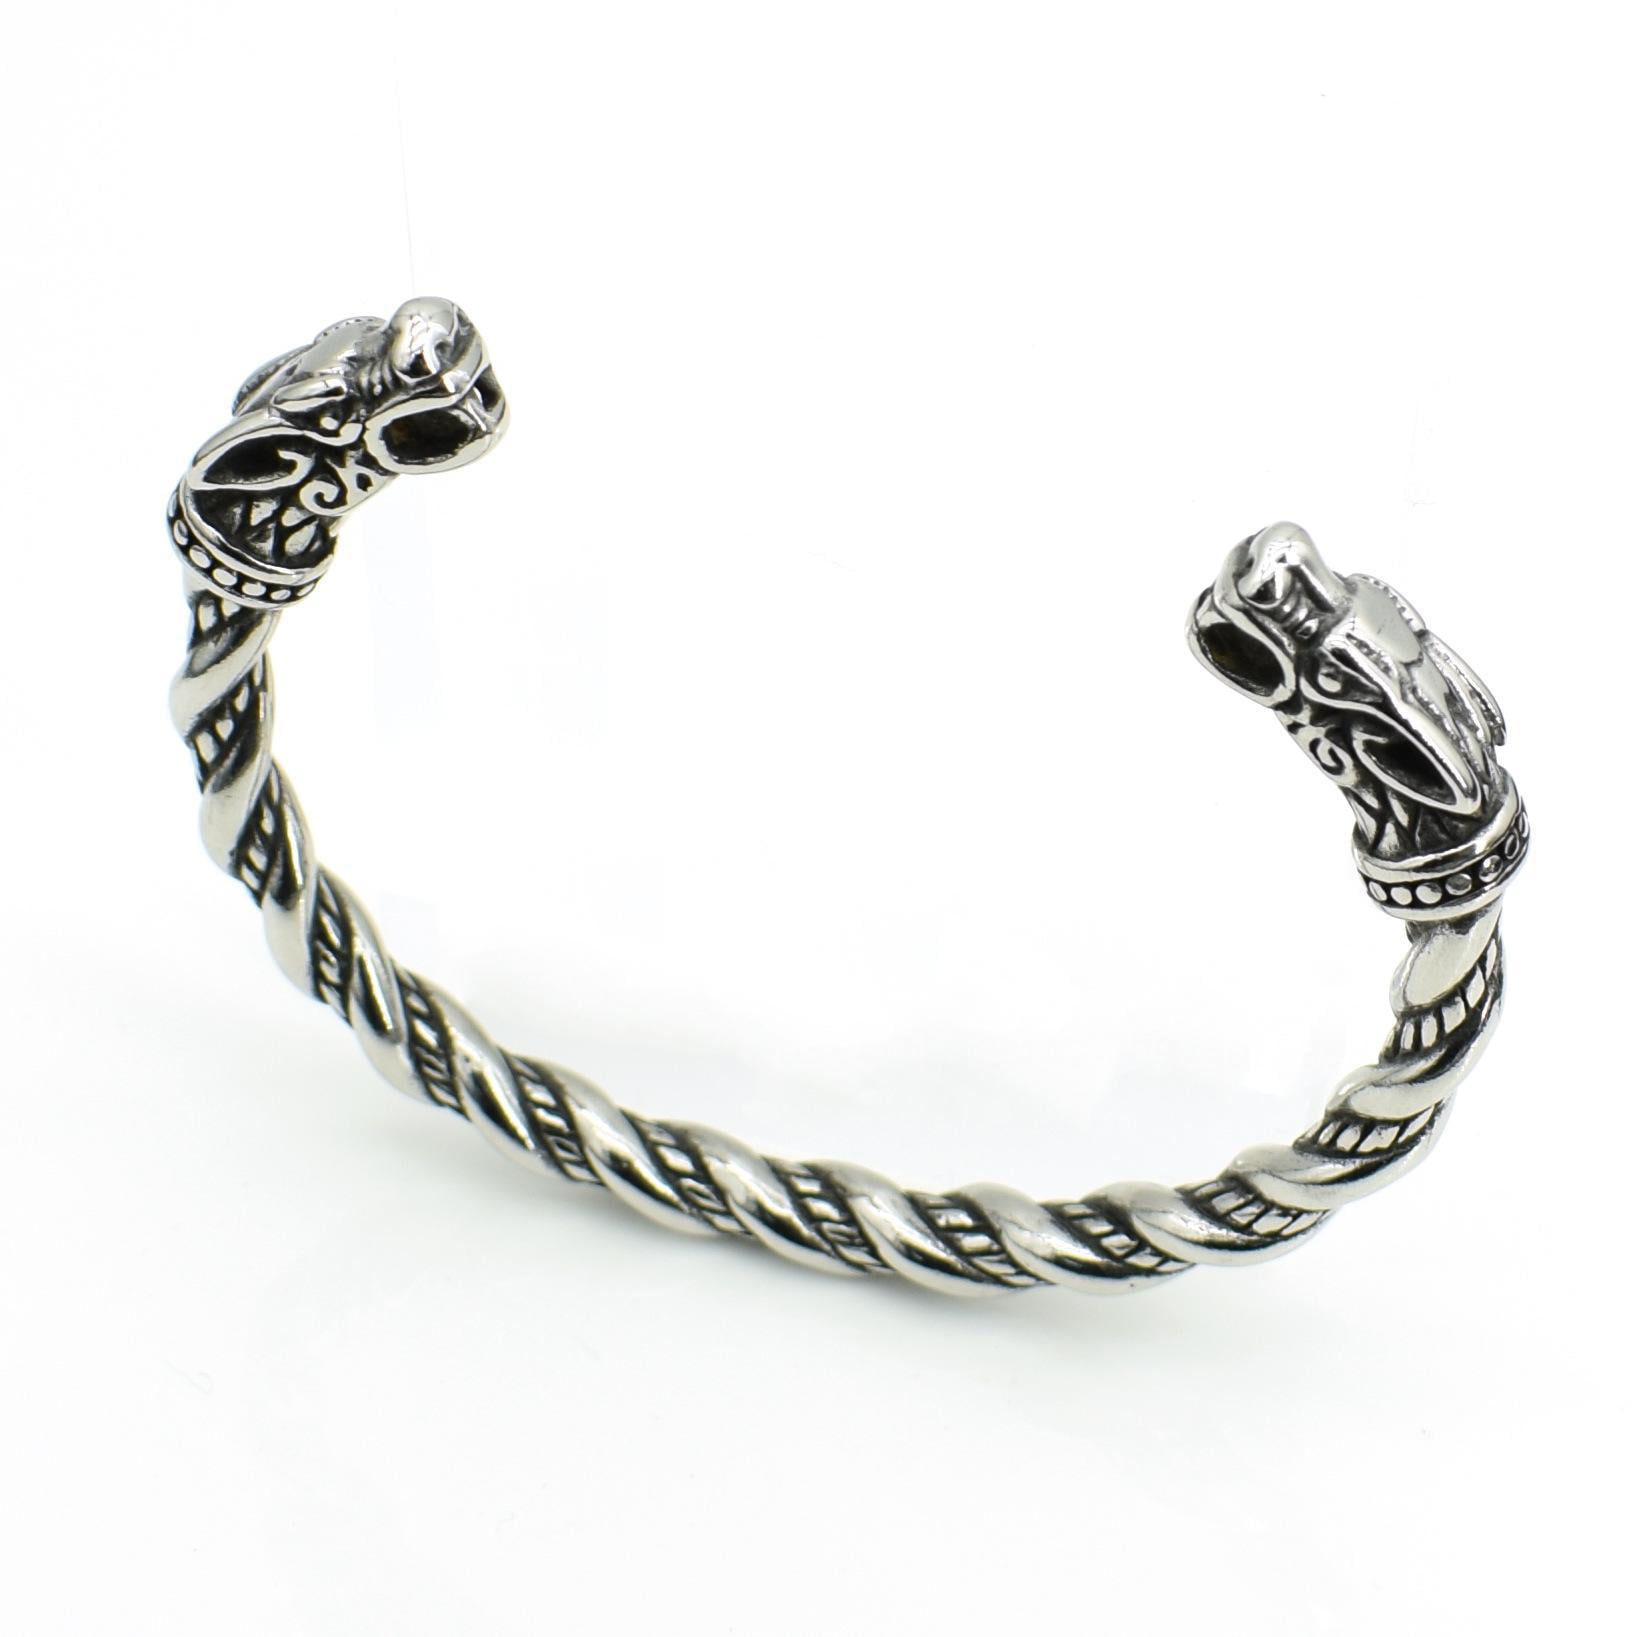 Norse Stainless Steel Cuff Viking Wolf Head Bracelet Bangle Medieval Celtic Men 